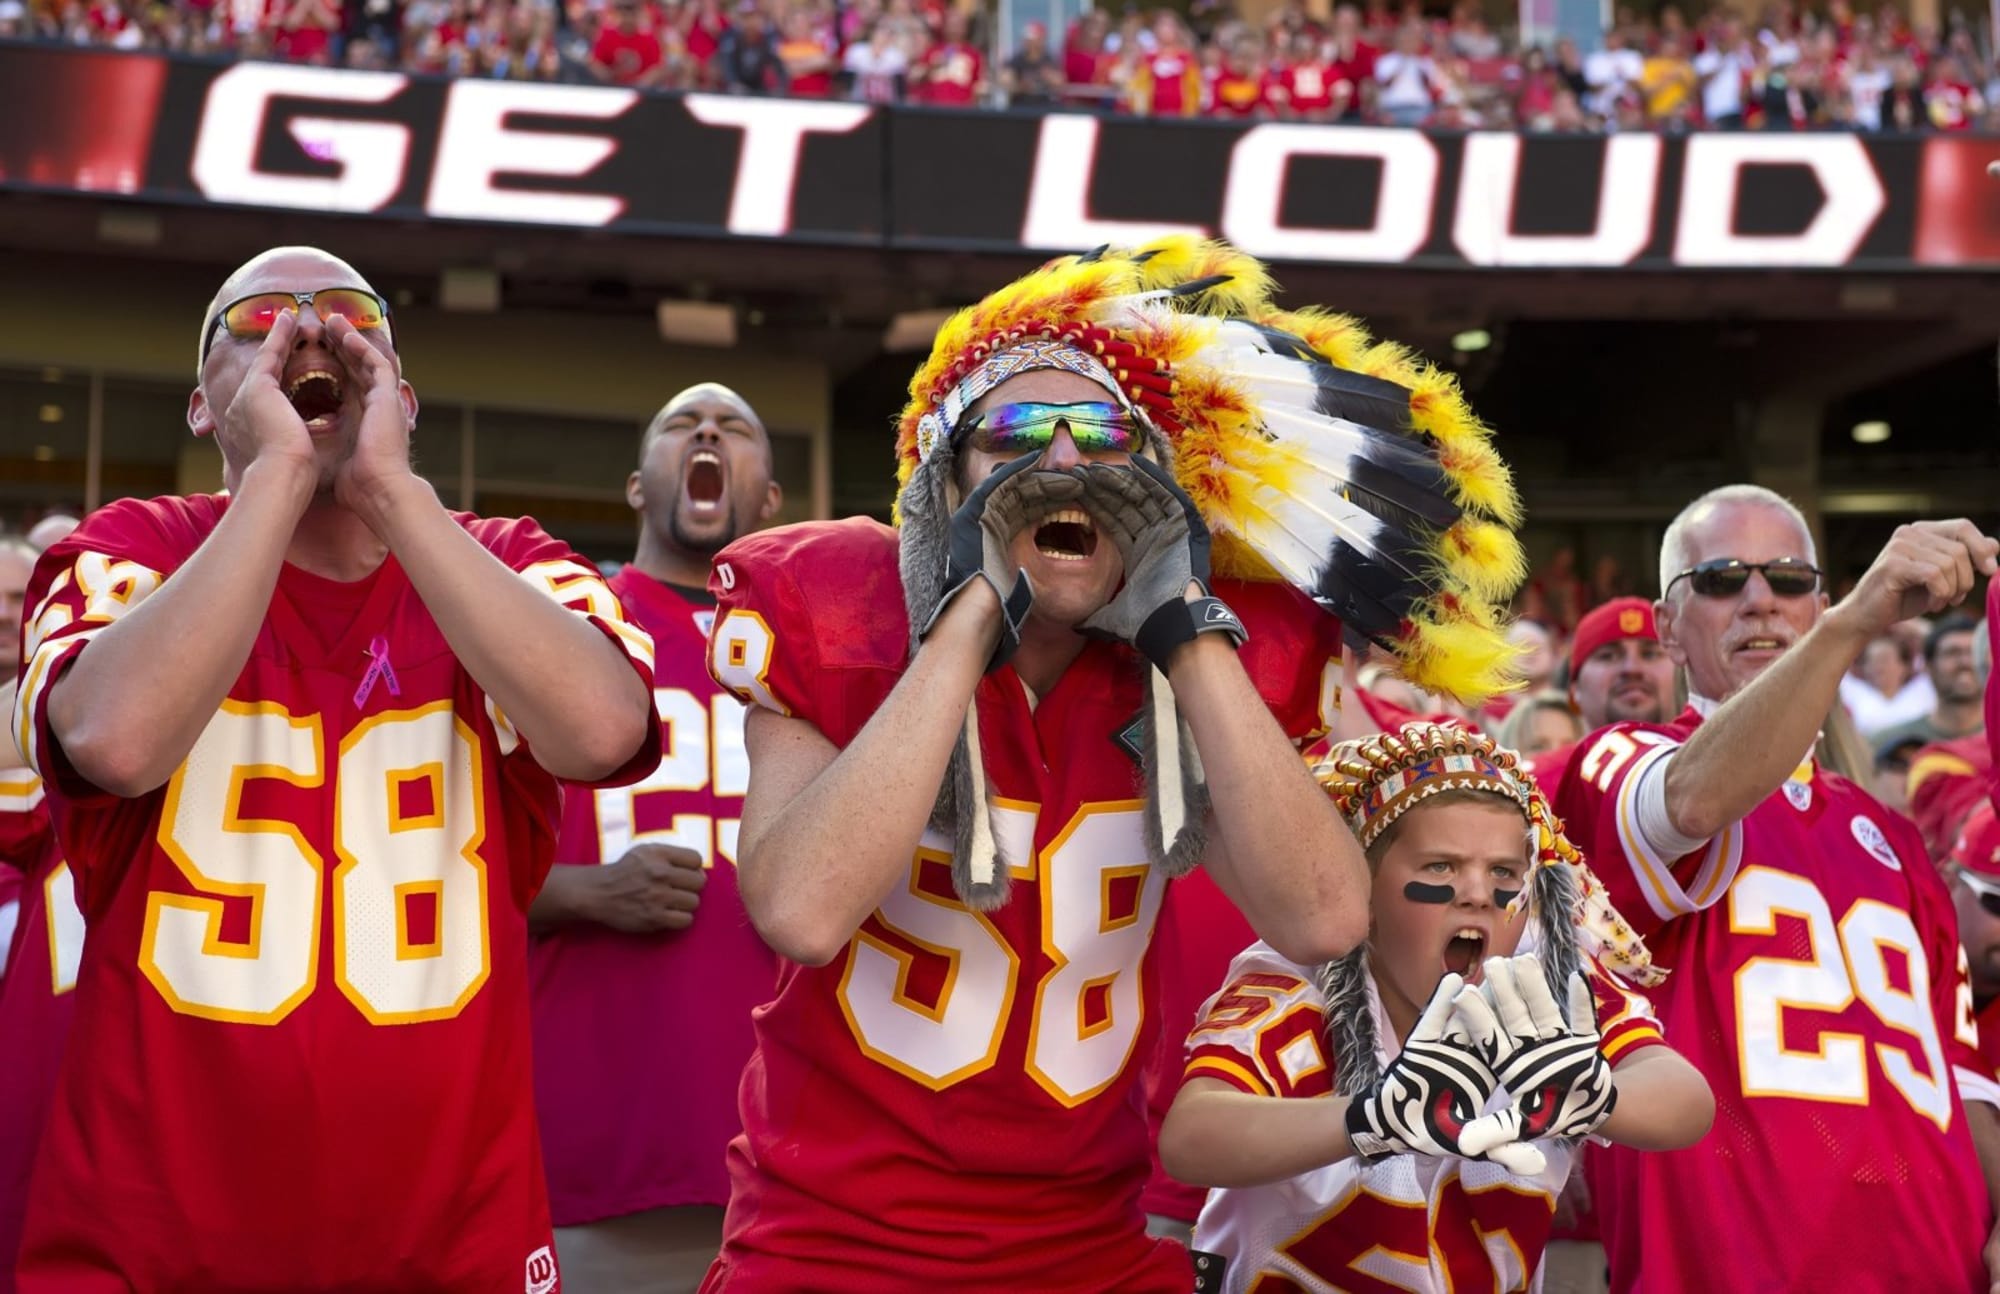 Kansas City Chiefs fans need to continue the Legend of the Roar